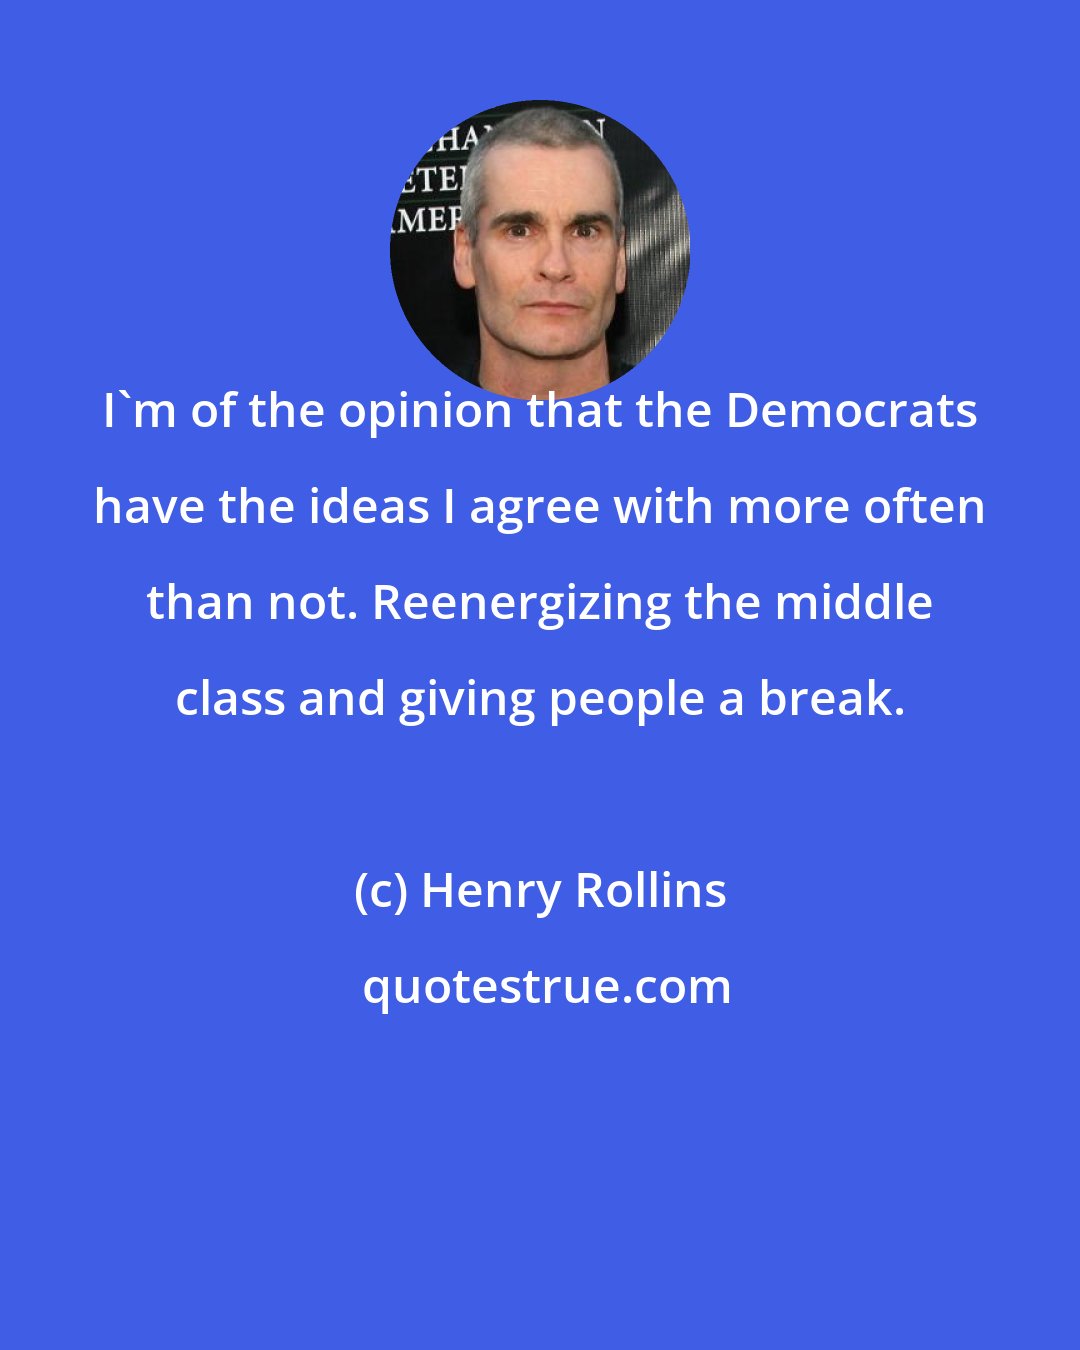 Henry Rollins: I'm of the opinion that the Democrats have the ideas I agree with more often than not. Reenergizing the middle class and giving people a break.